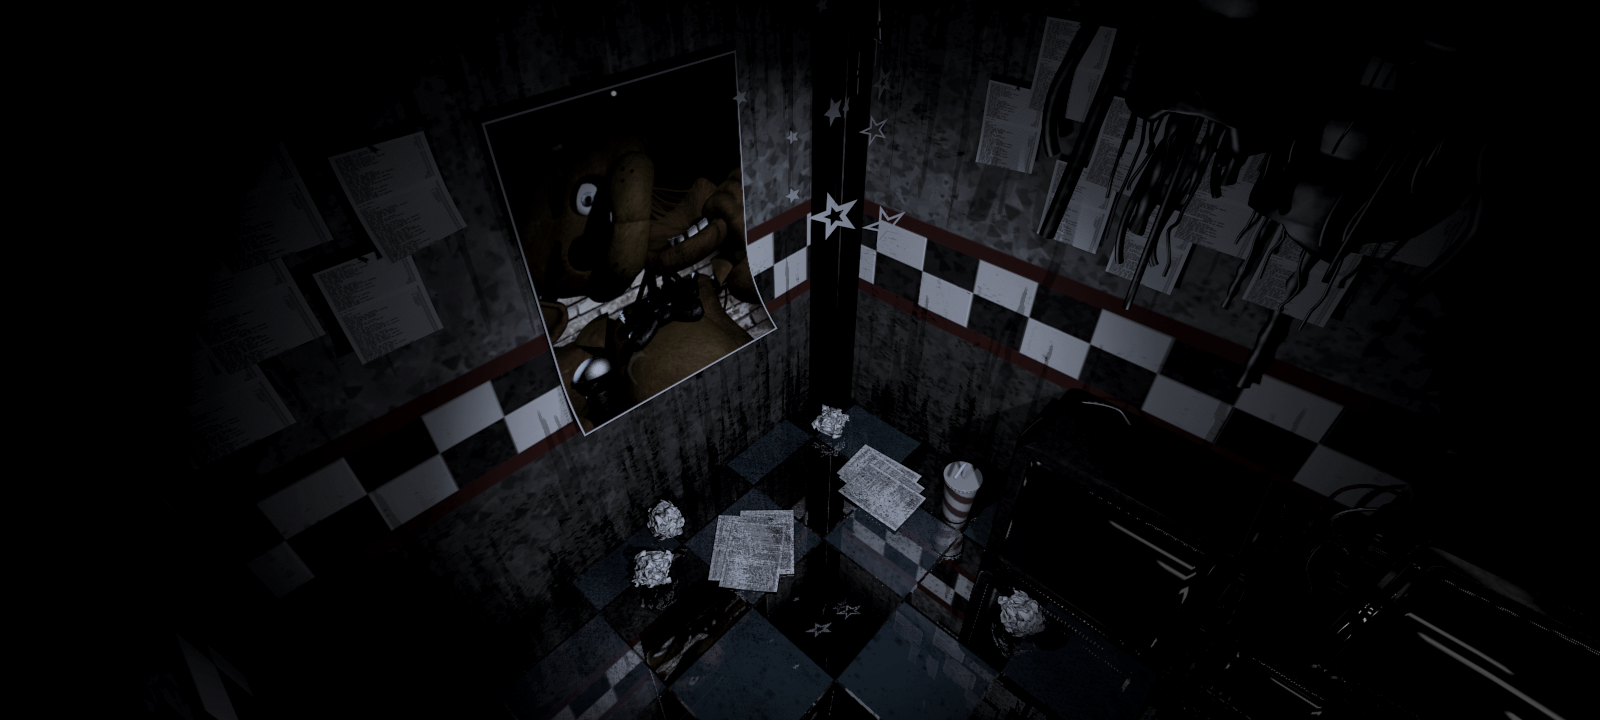 Five Nights at Freddy's' Room-scale VR Fan Remake Puts You Face-to-face  with Freddy Fazbear